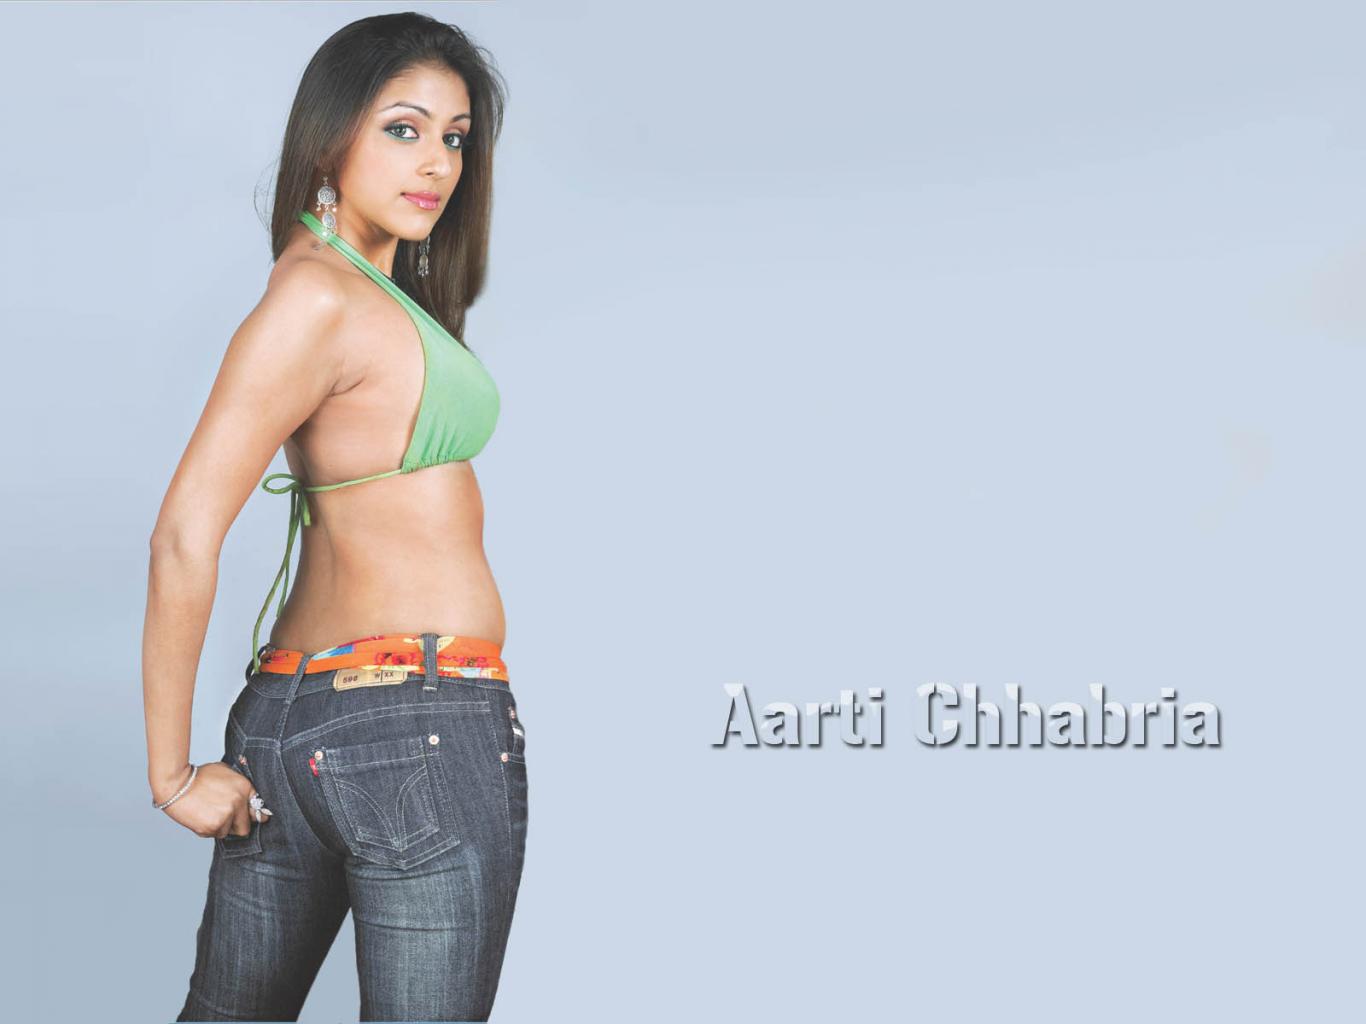 Wallpaper Free - Aarti Chhabria In Hot , HD Wallpaper & Backgrounds